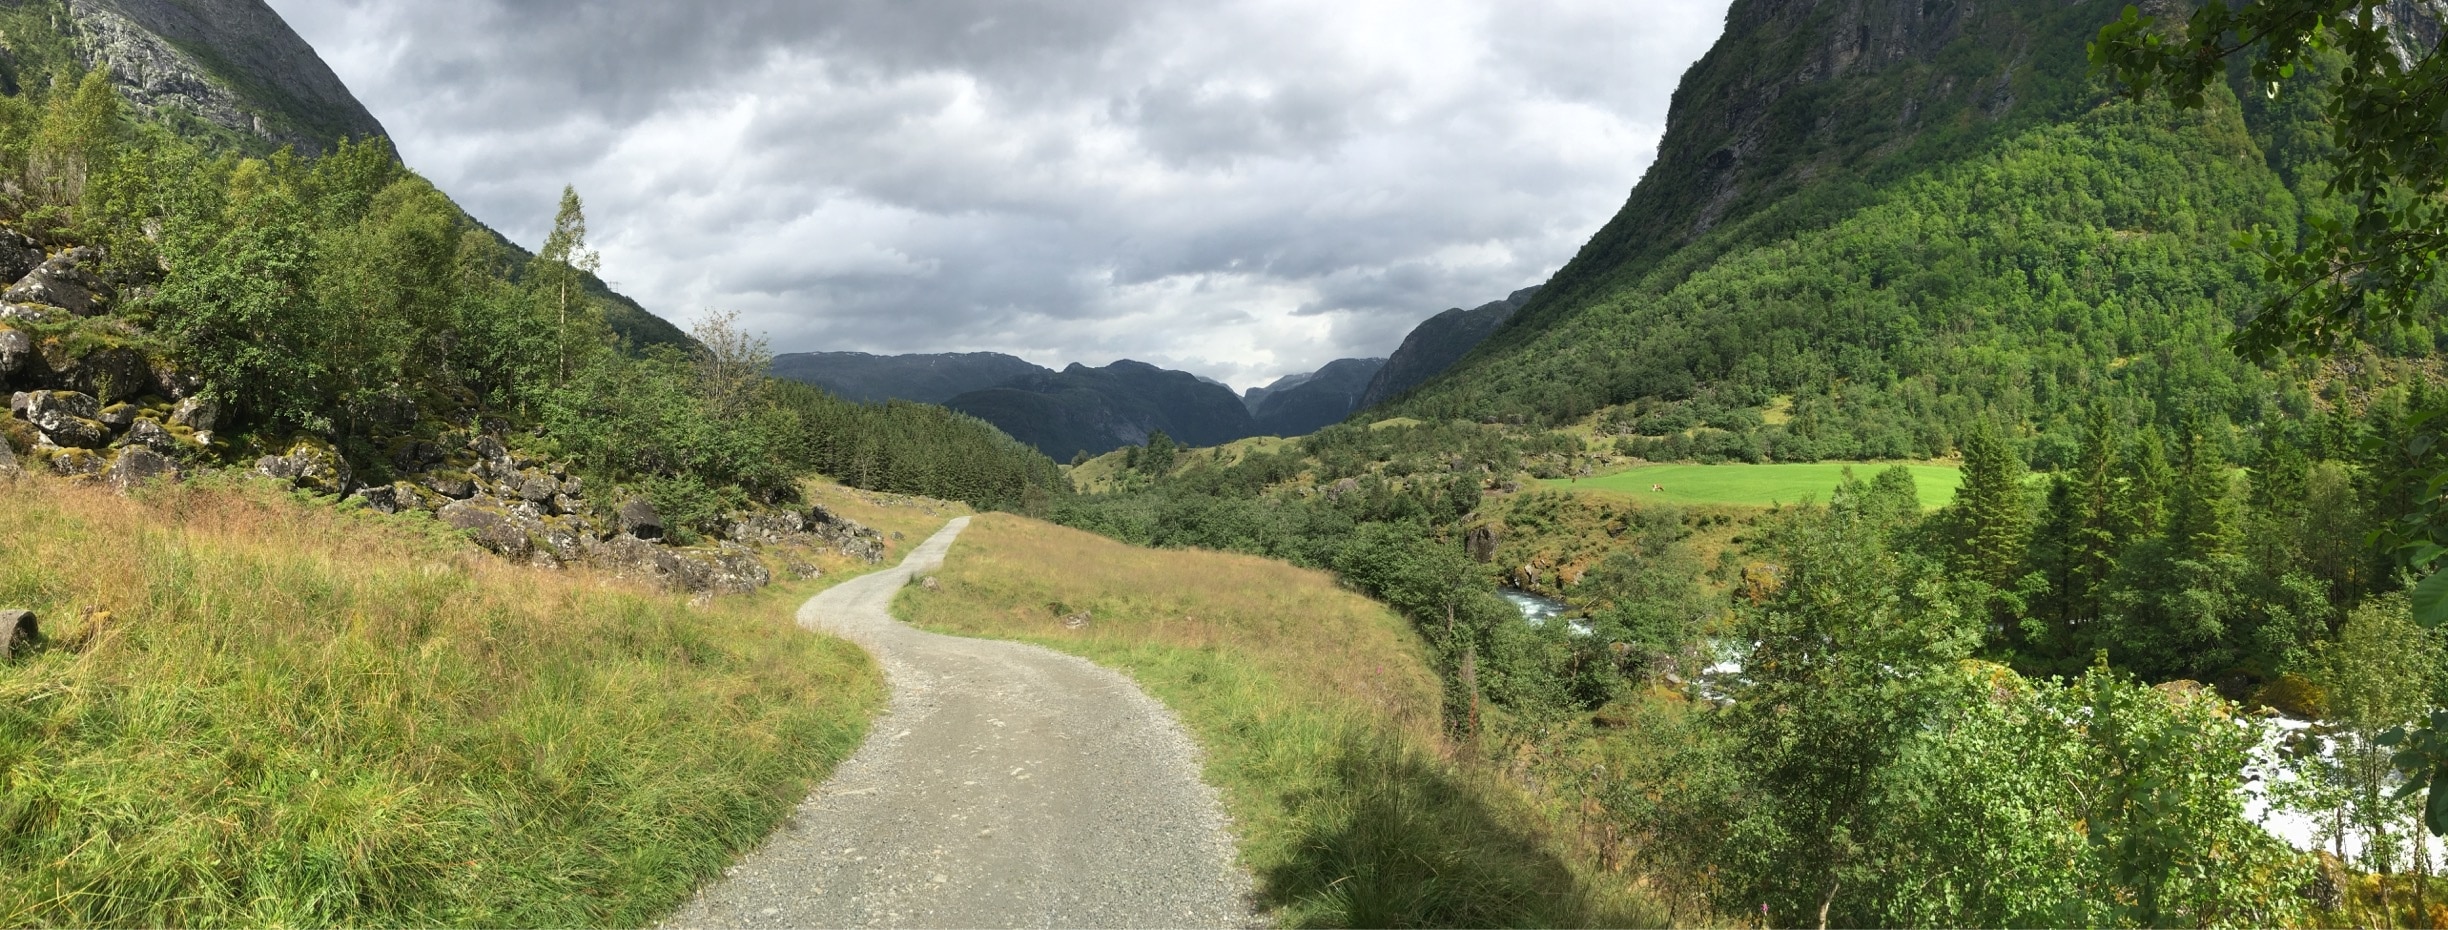 Valley seen during a hike from Bondhus/sunndal to Bondhusdalen lake at the bottom of the glacier #takeahike